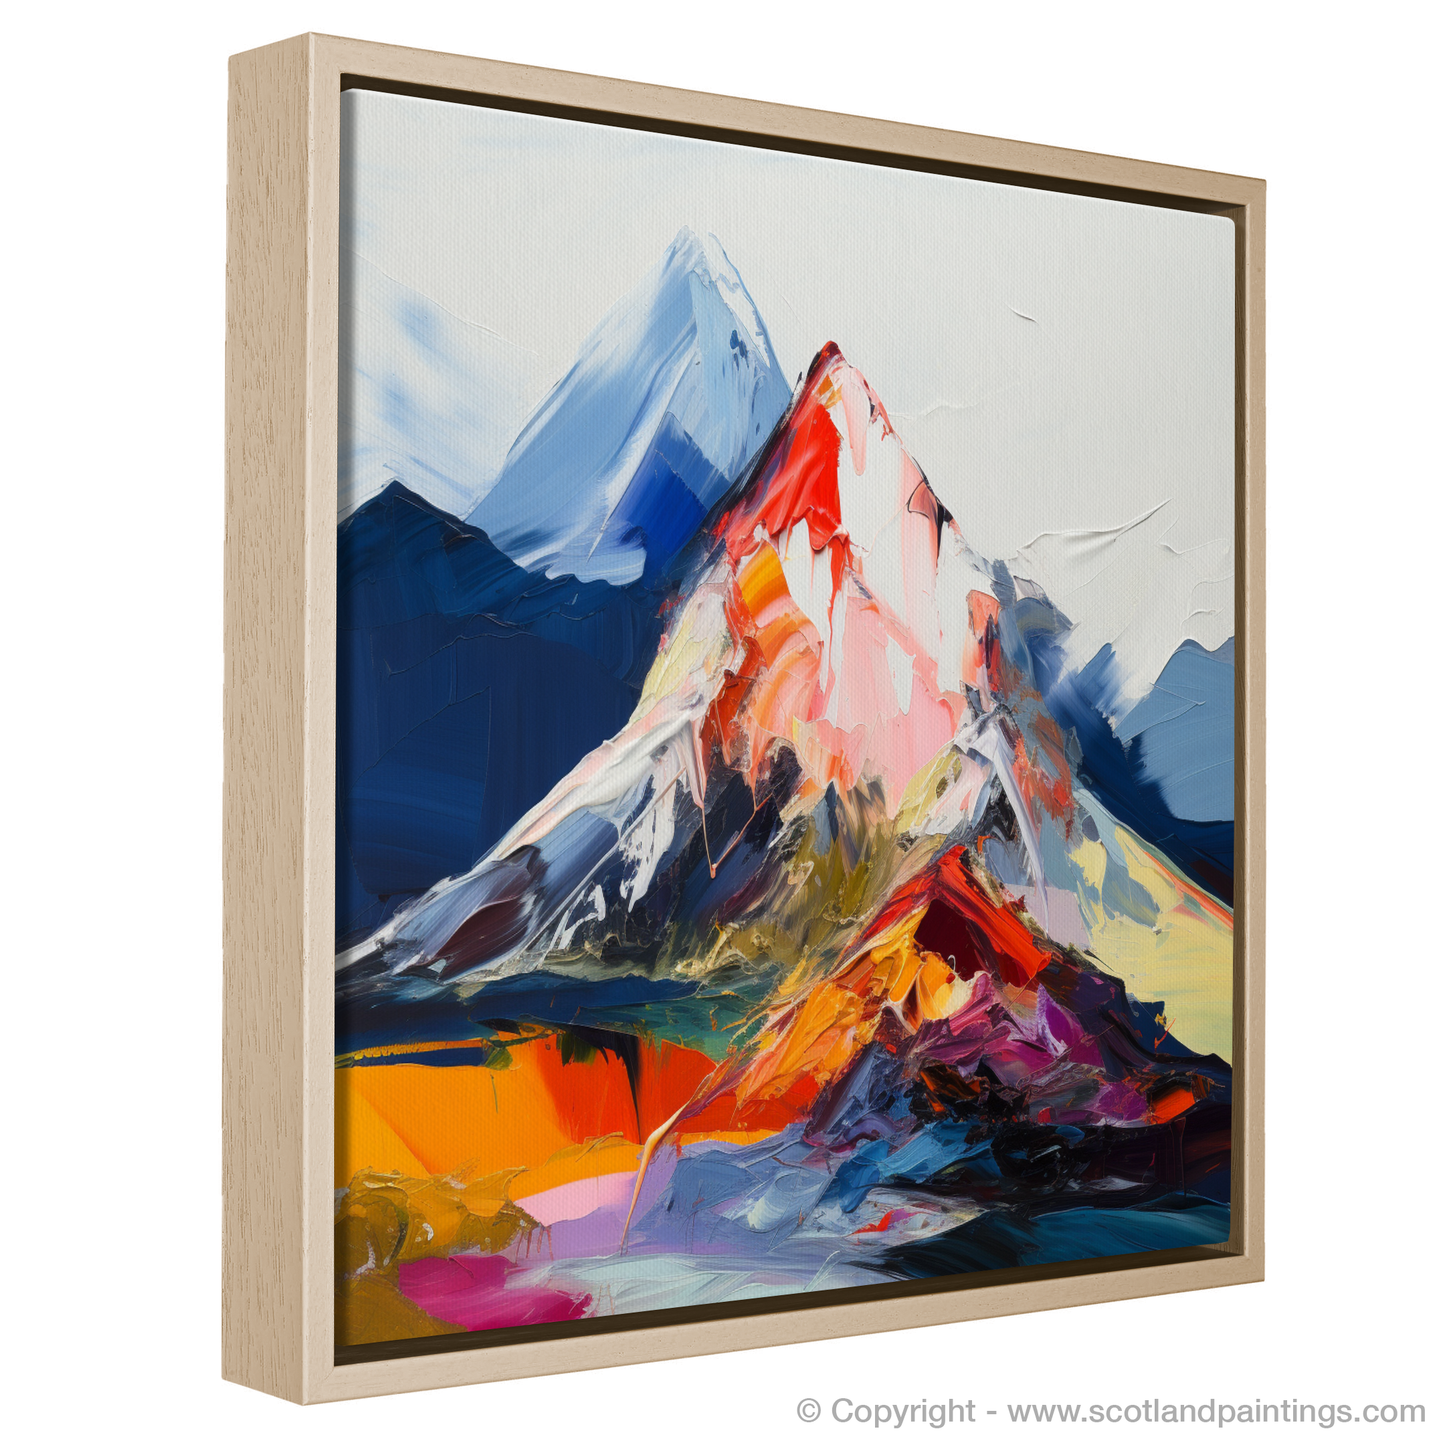 Painting and Art Print of Mount Keen entitled "Majestic Mount Keen: An Expressionist Ode to the Scottish Highlands".